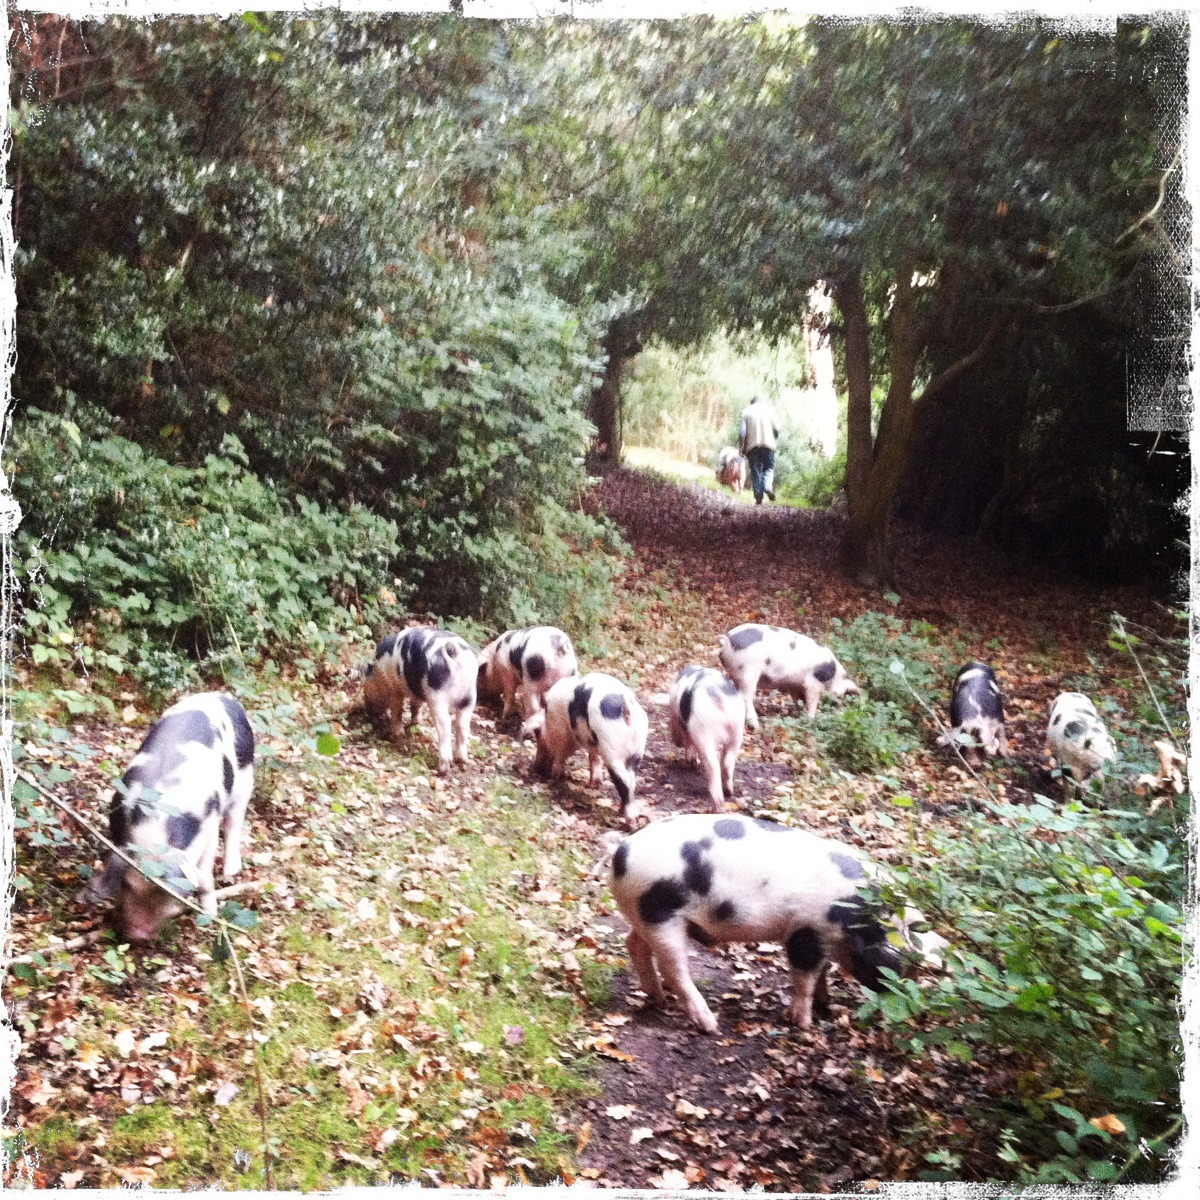 The pigs exploring the forest